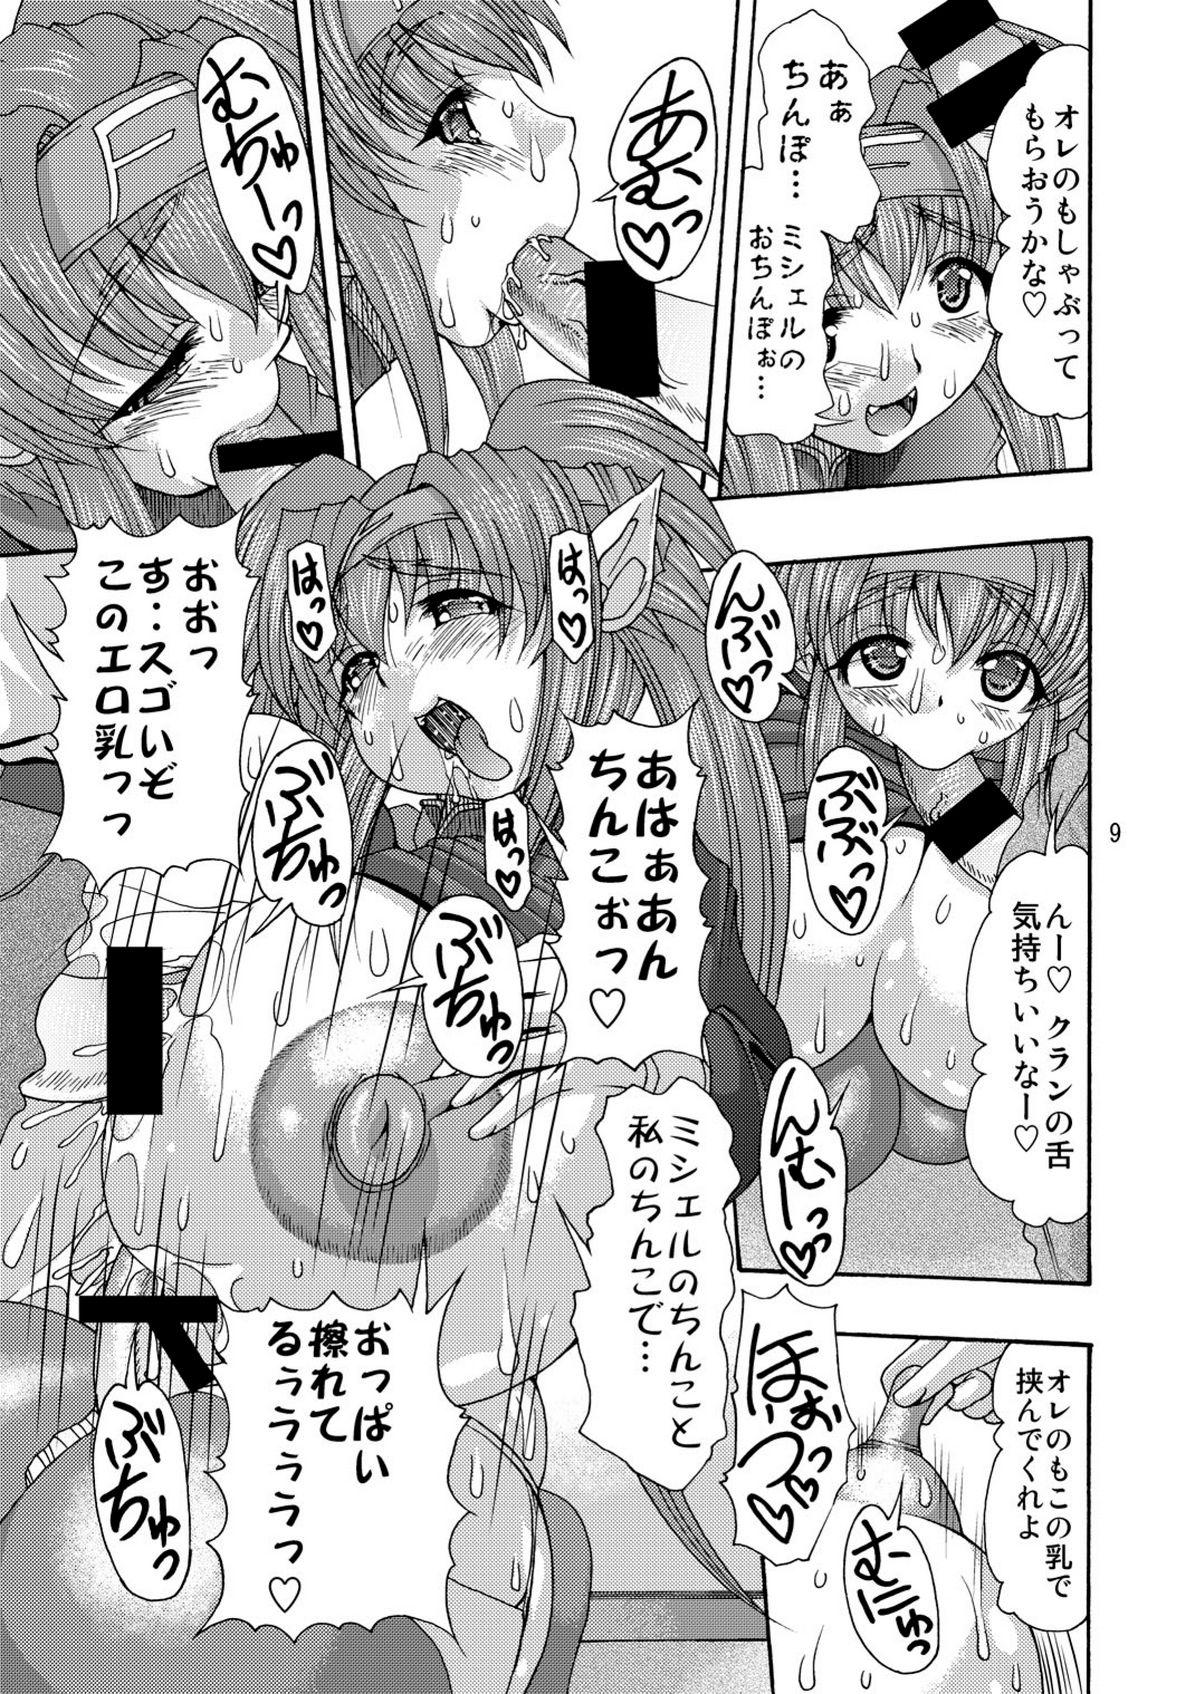 Black Woman Muchipuni Paradise! - Macross frontier Tied - Page 9